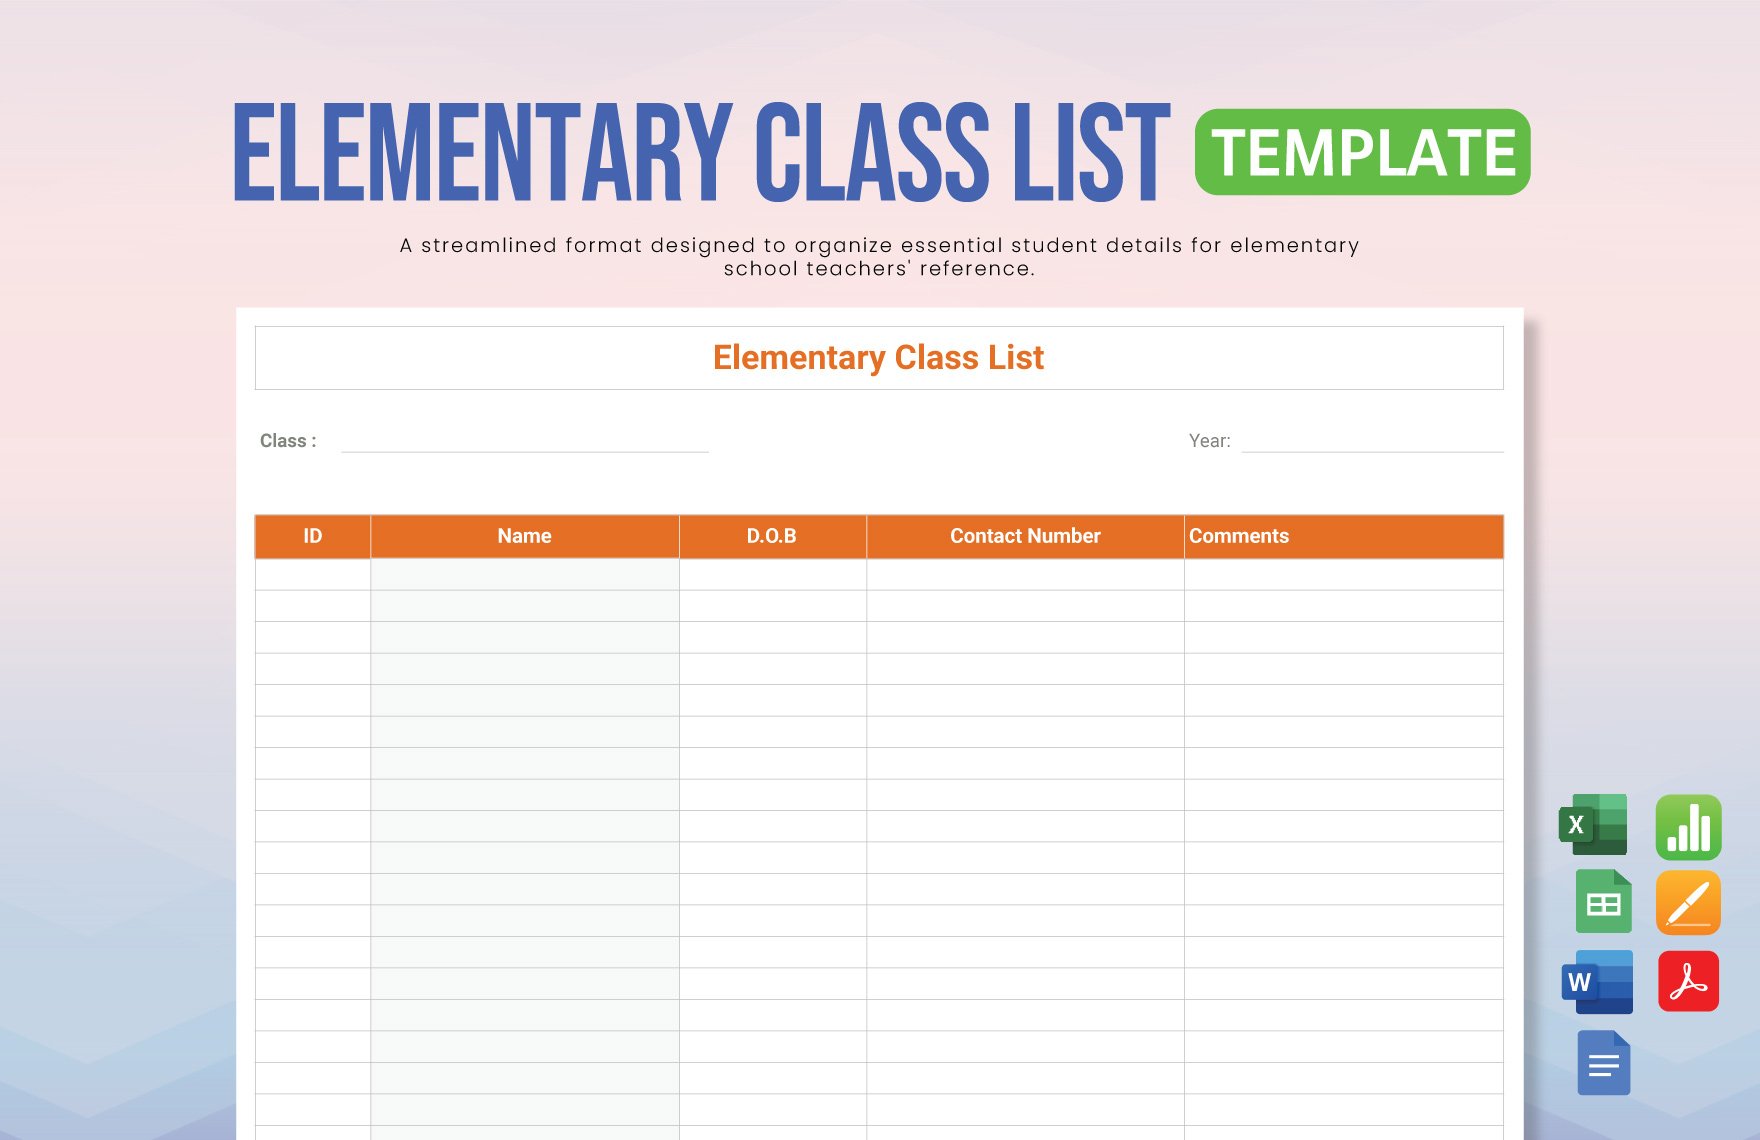 Free Elementary Class List Template in Word, Google Docs, Excel, PDF, Google Sheets, Apple Pages, Apple Numbers